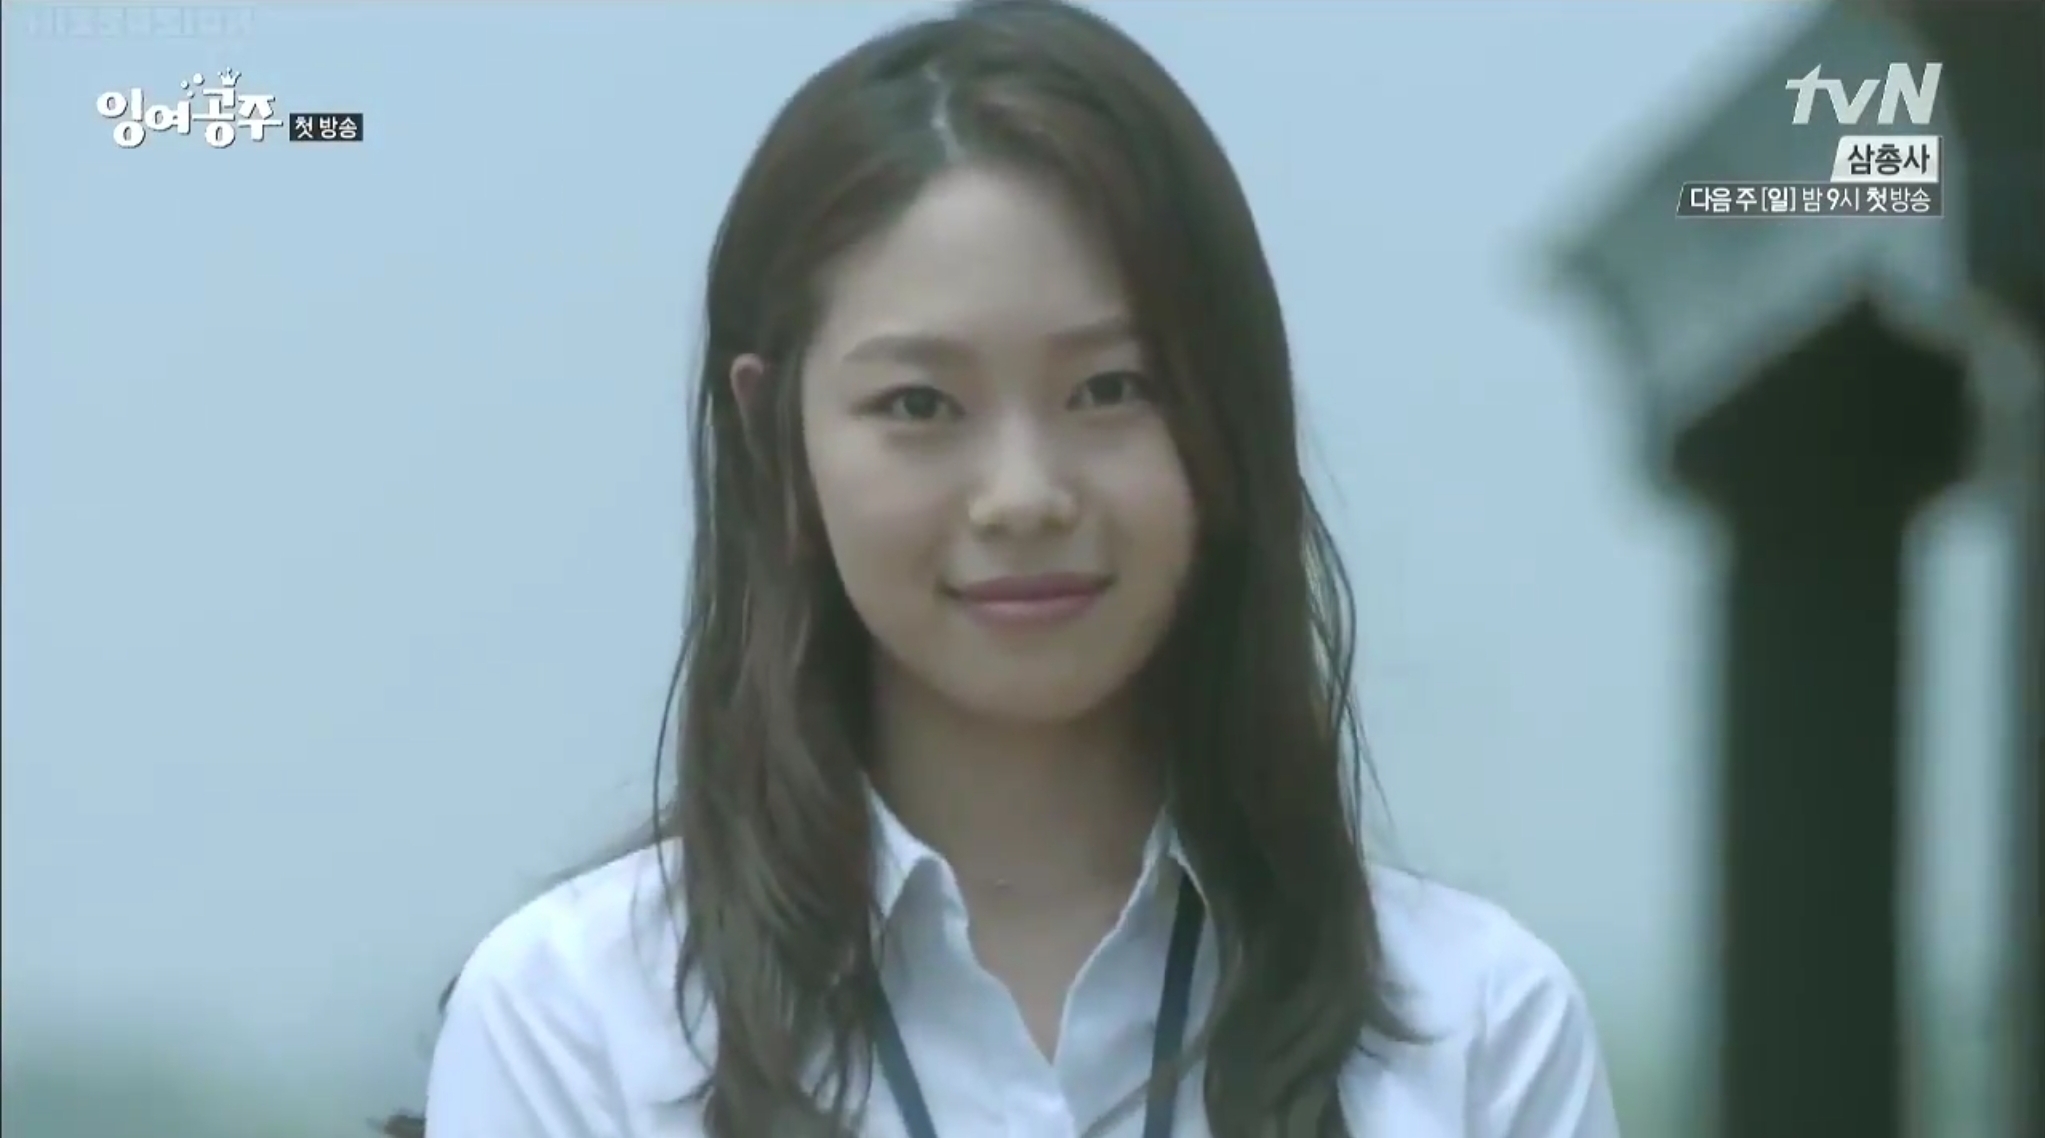 Park Ji-soo in his first appearence in Surplus Mermaid- She smiles upfront to the camera.